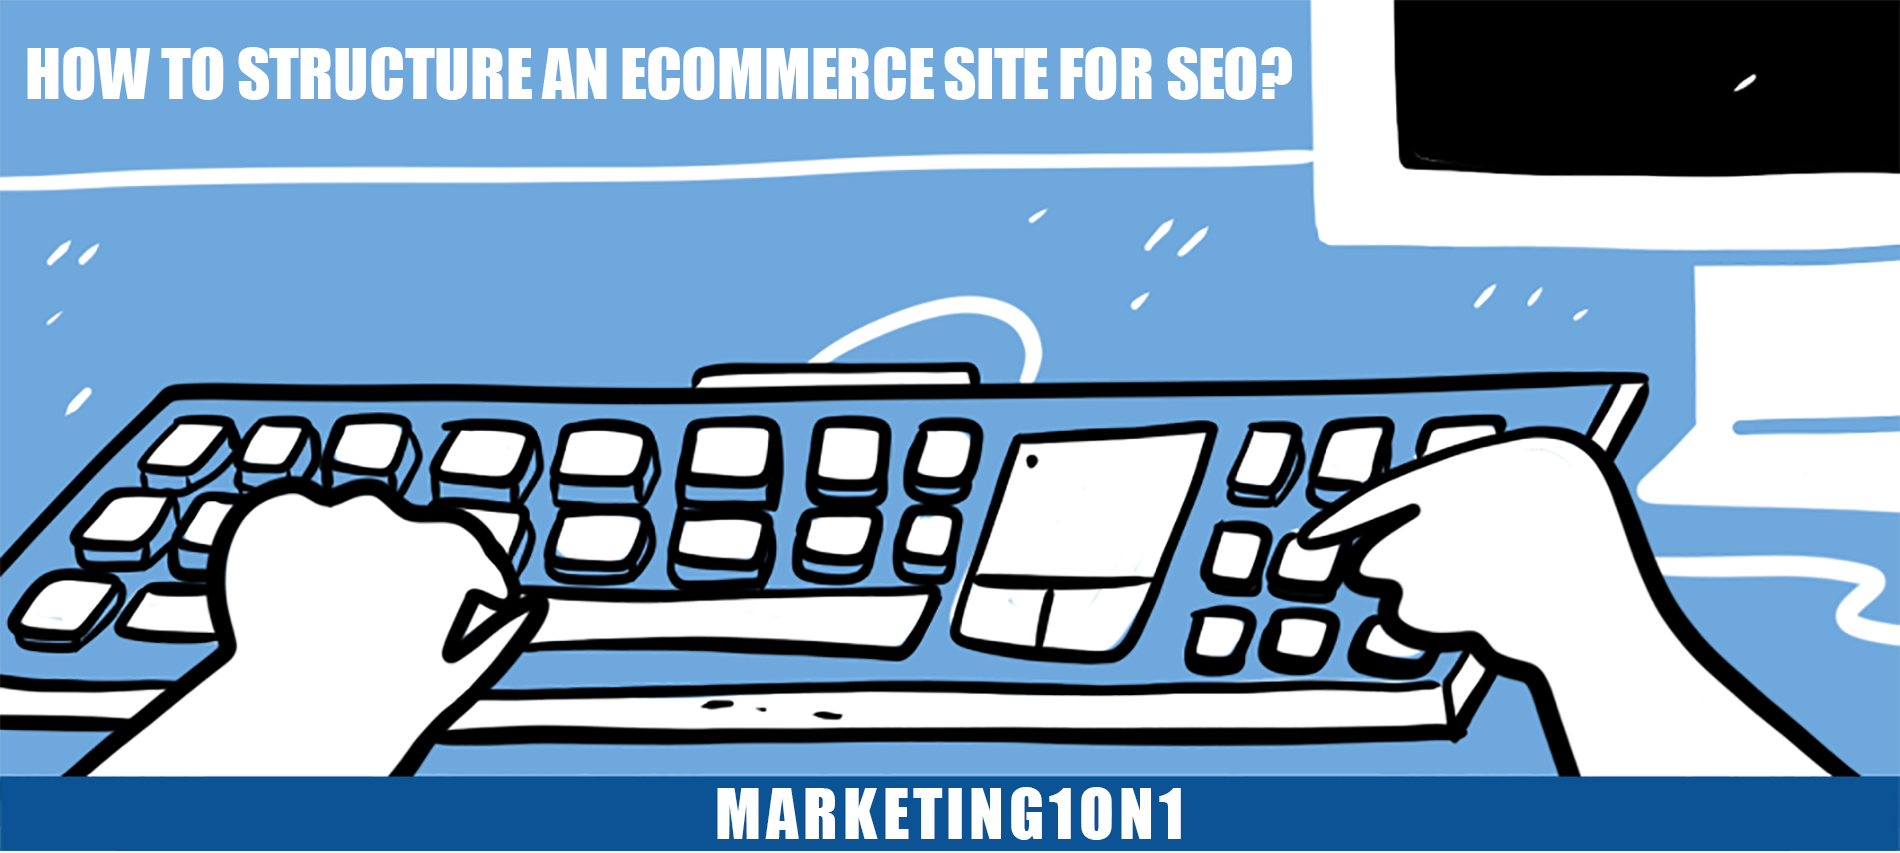 How to structure an eCommerce site for SEO?